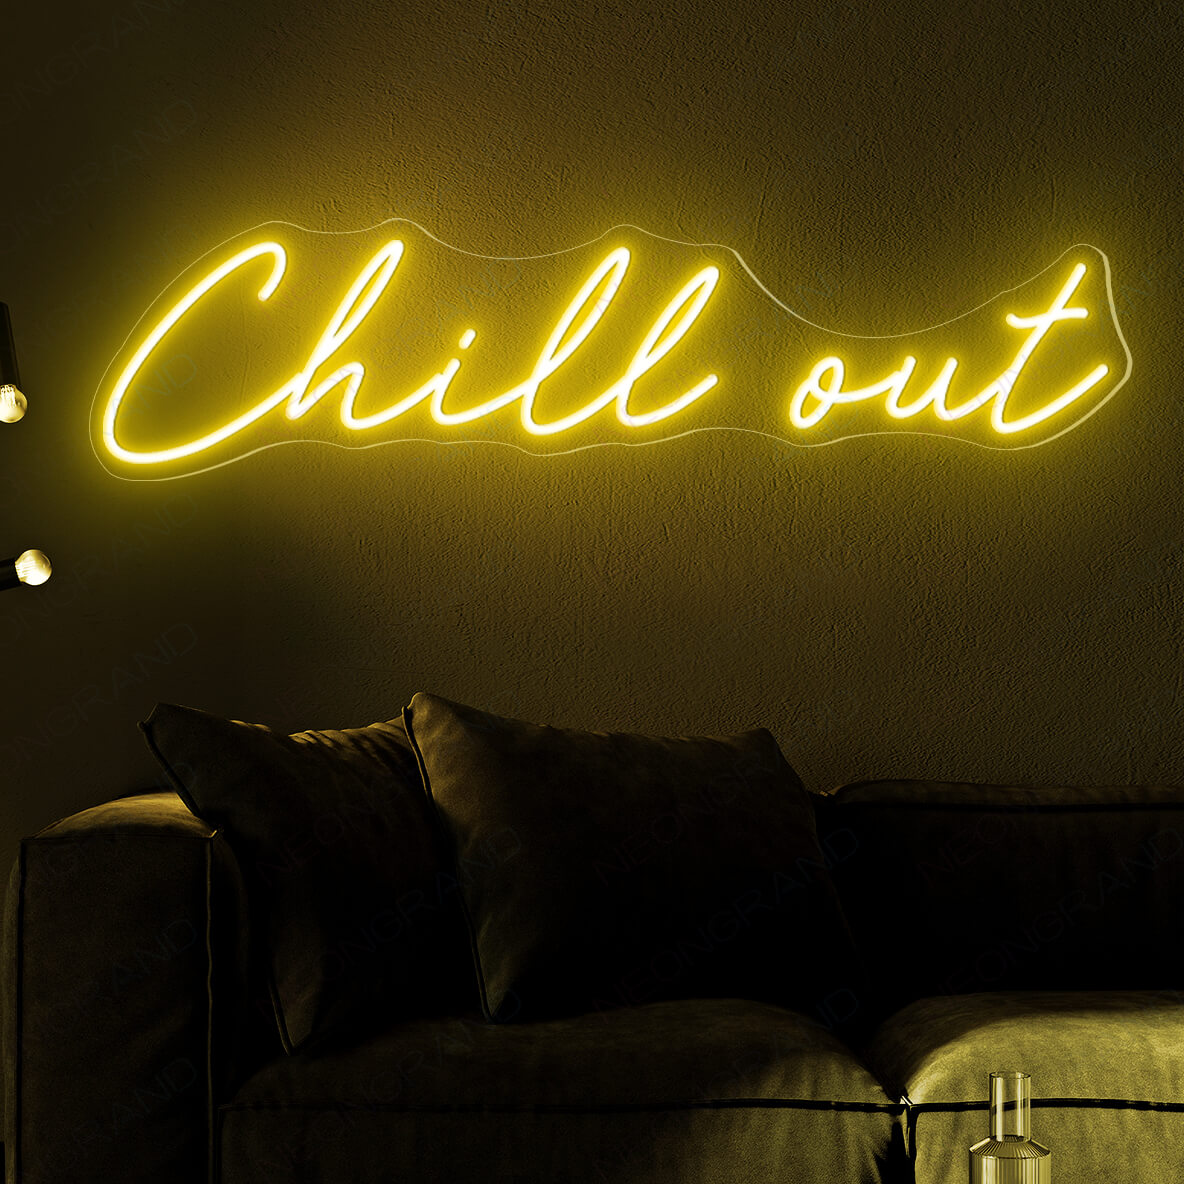 Chill Out Neon Sign Led Light yellow